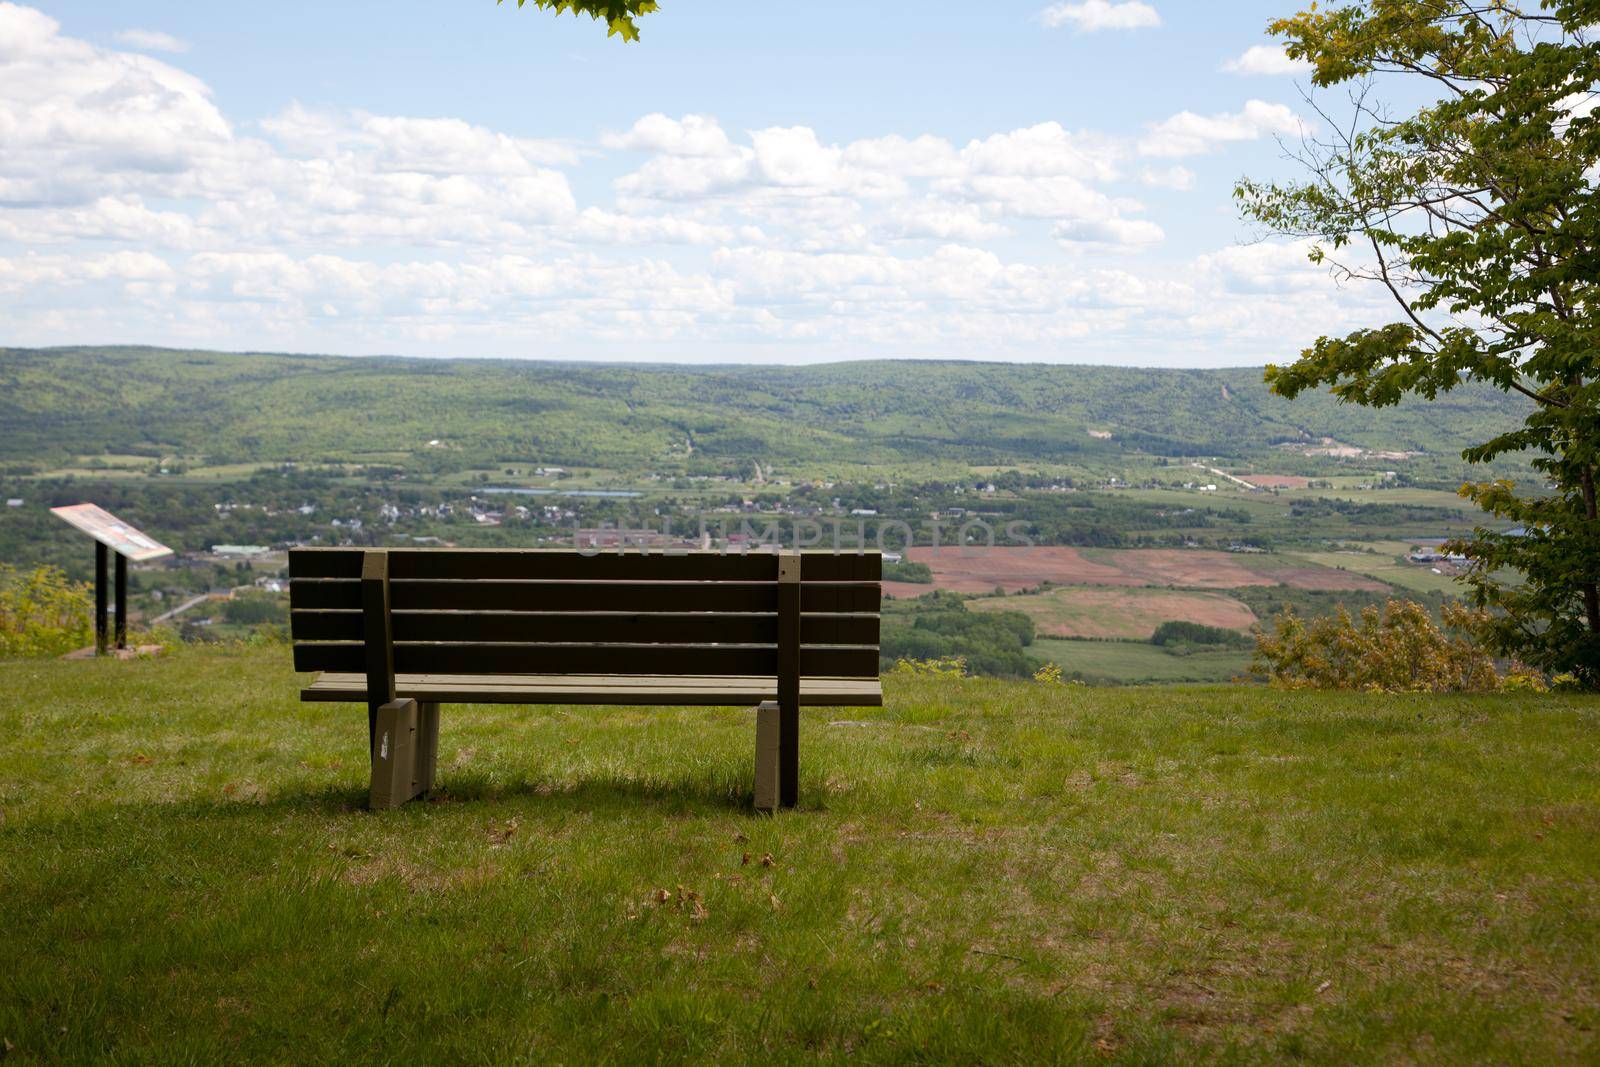  A park bench at Valleyview Provincial Campground overlooks the Annpolis Valley in Canada